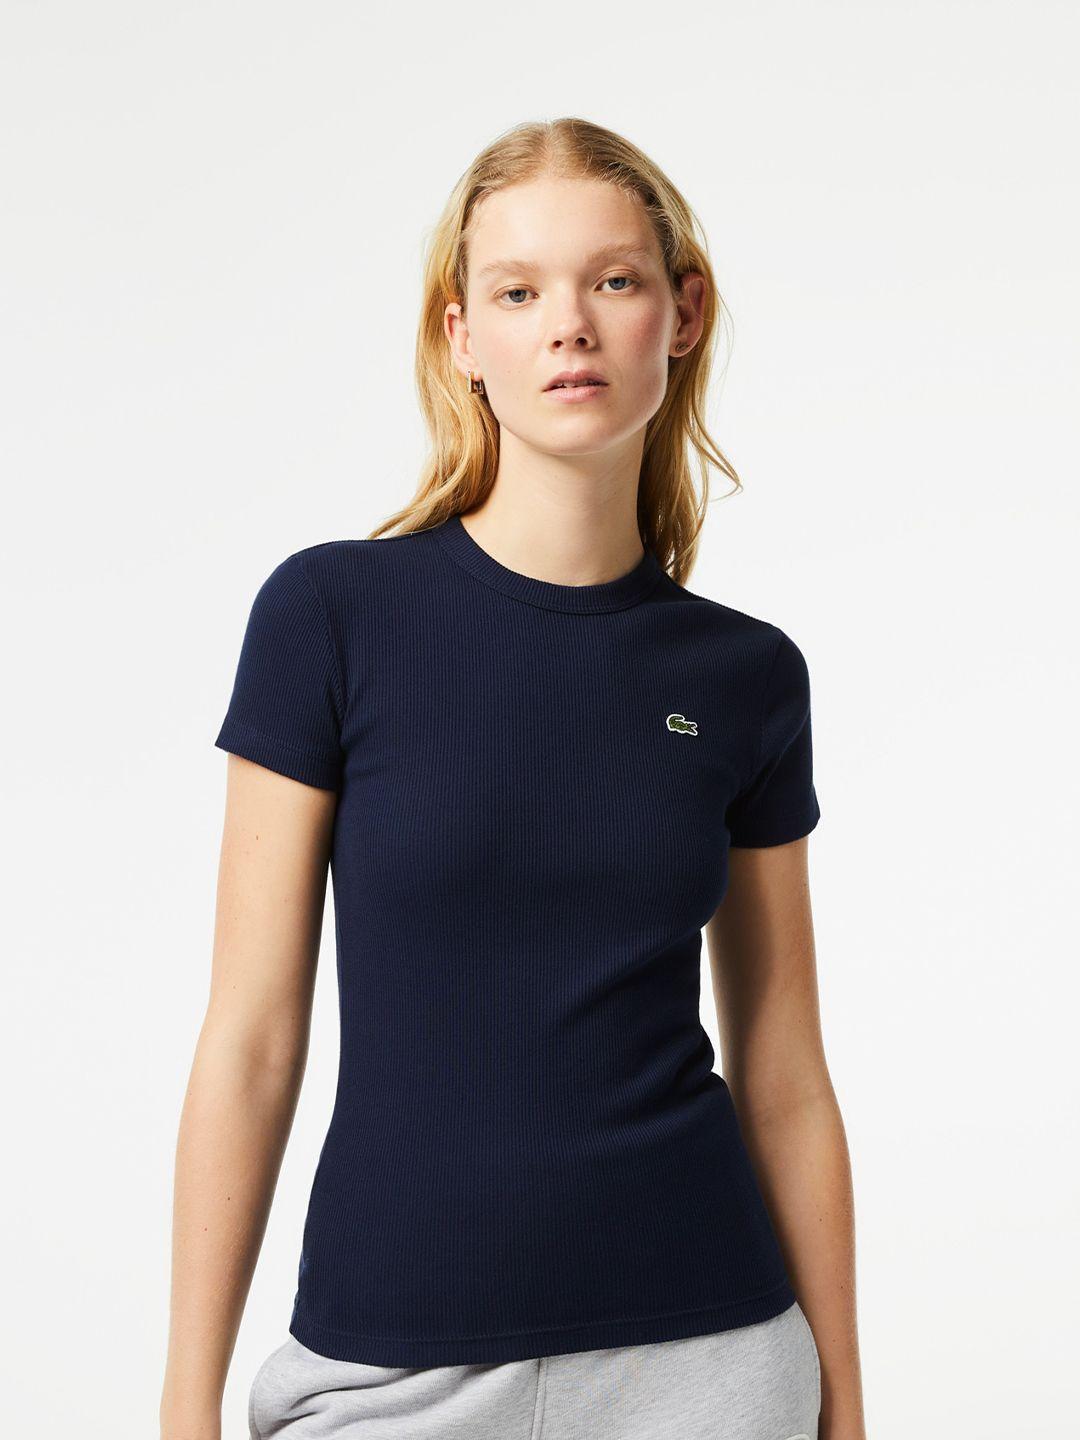 lacoste round neck slim fit brand logo embroidered cotton t-shirt